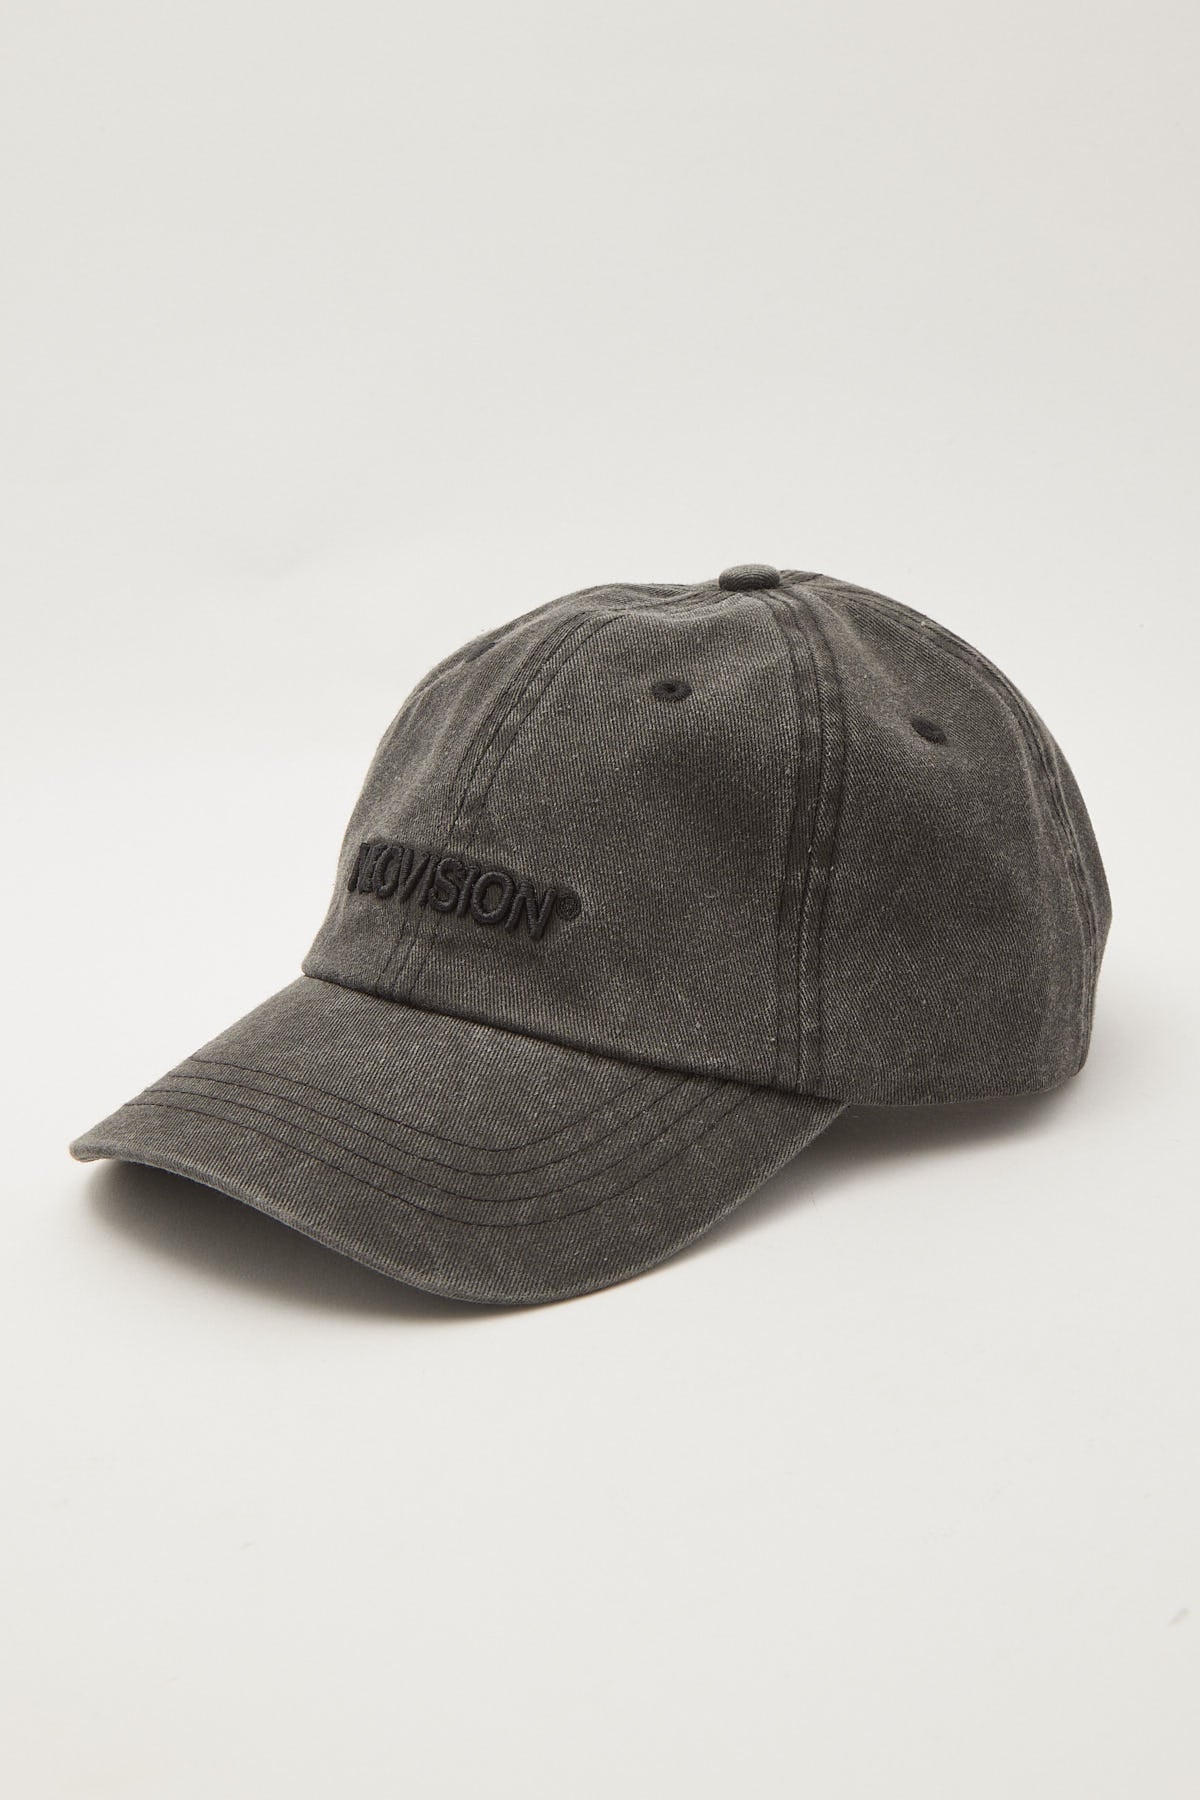 Neovision Curation Dad Cap Washed Black